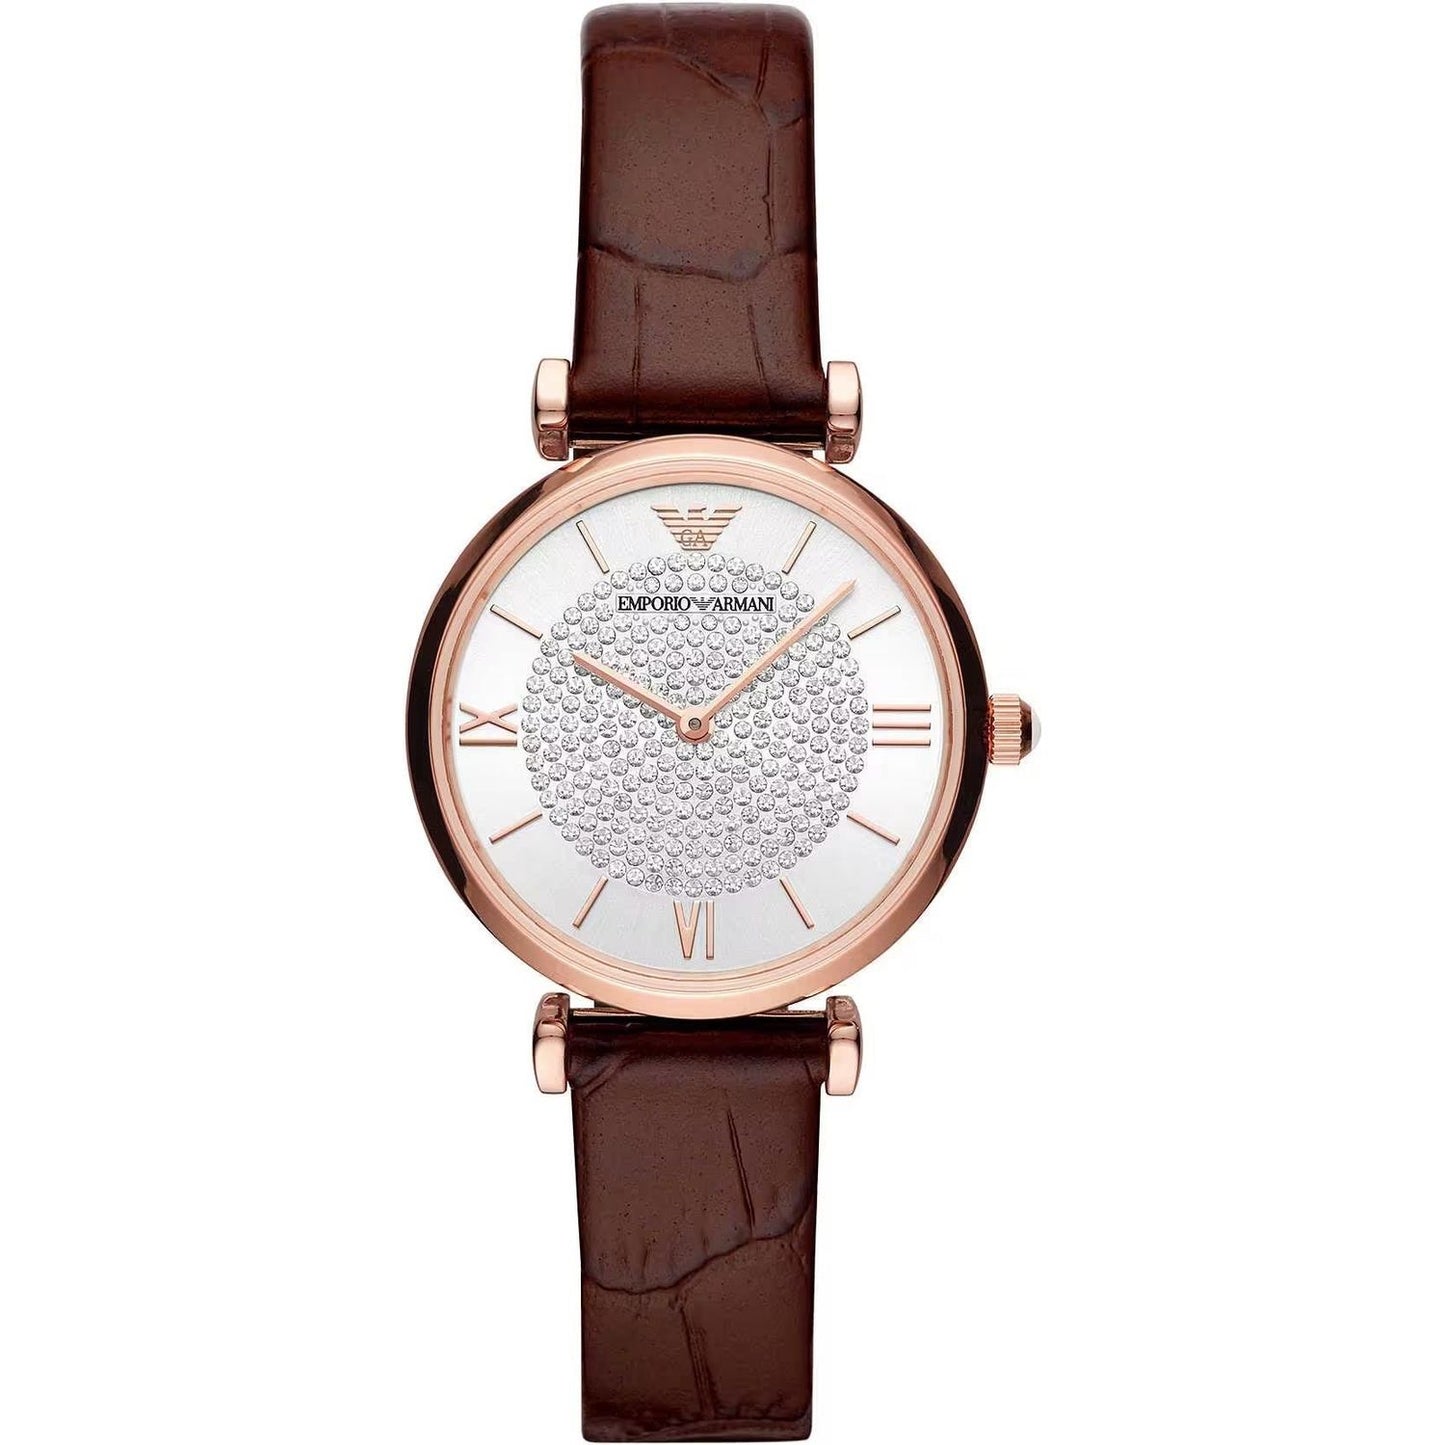 Emporio Armani Elegant Bordeaux Leather Watch for Women brown-steel-and-leather-quartz-watch